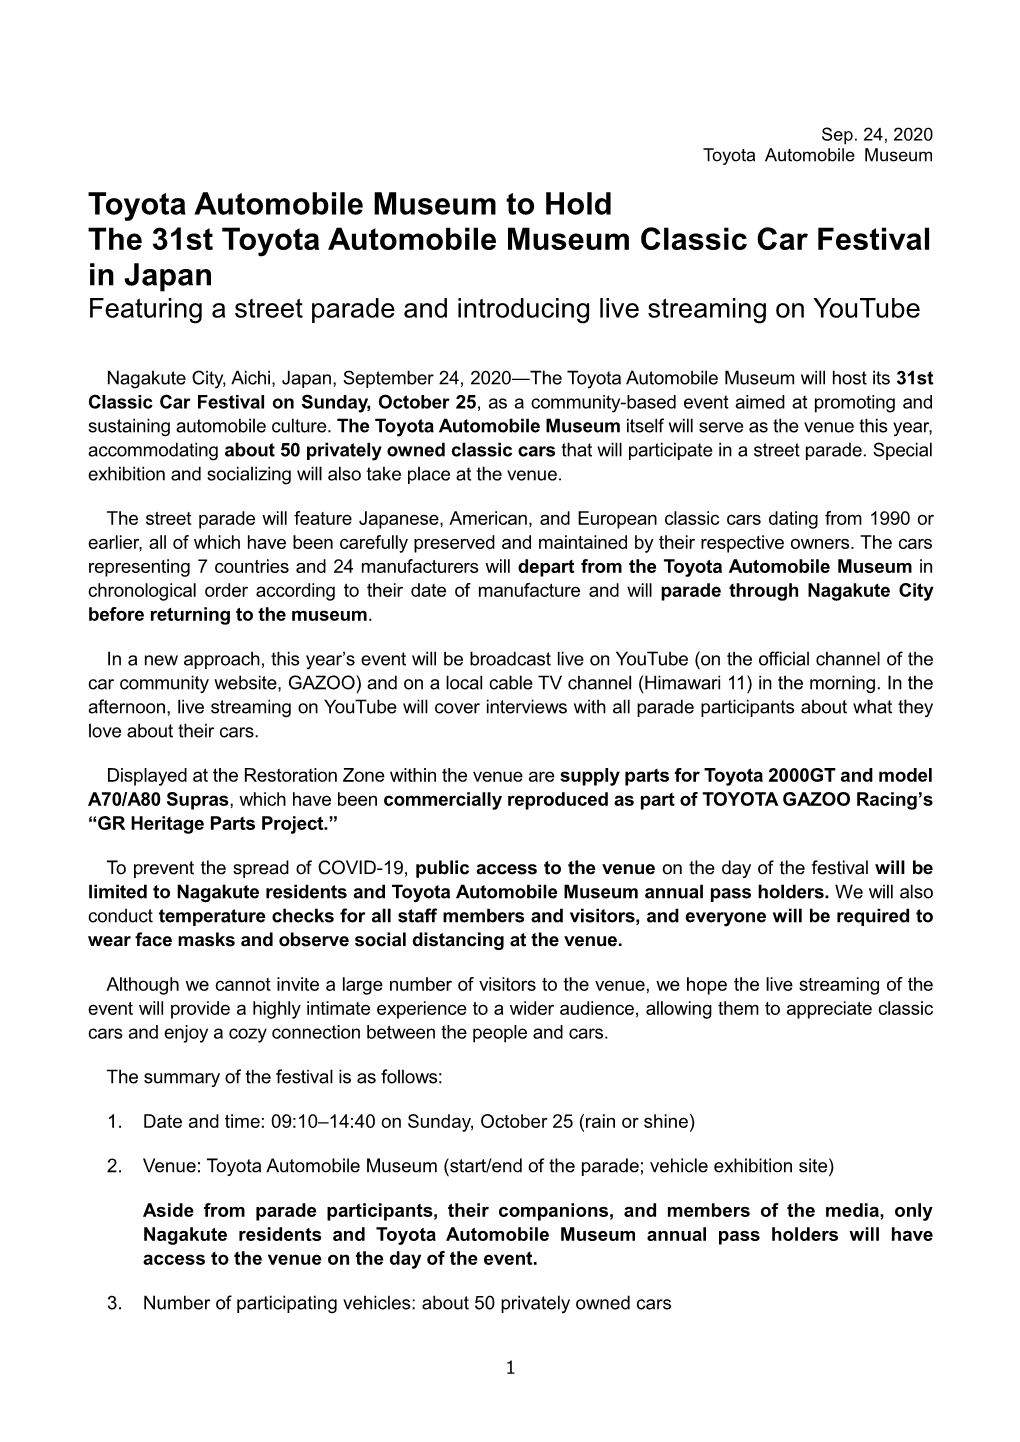 Toyota Automobile Museum to Hold the 31St Toyota Automobile Museum Classic Car Festival in Japan Featuring a Street Parade and Introducing Live Streaming on Youtube